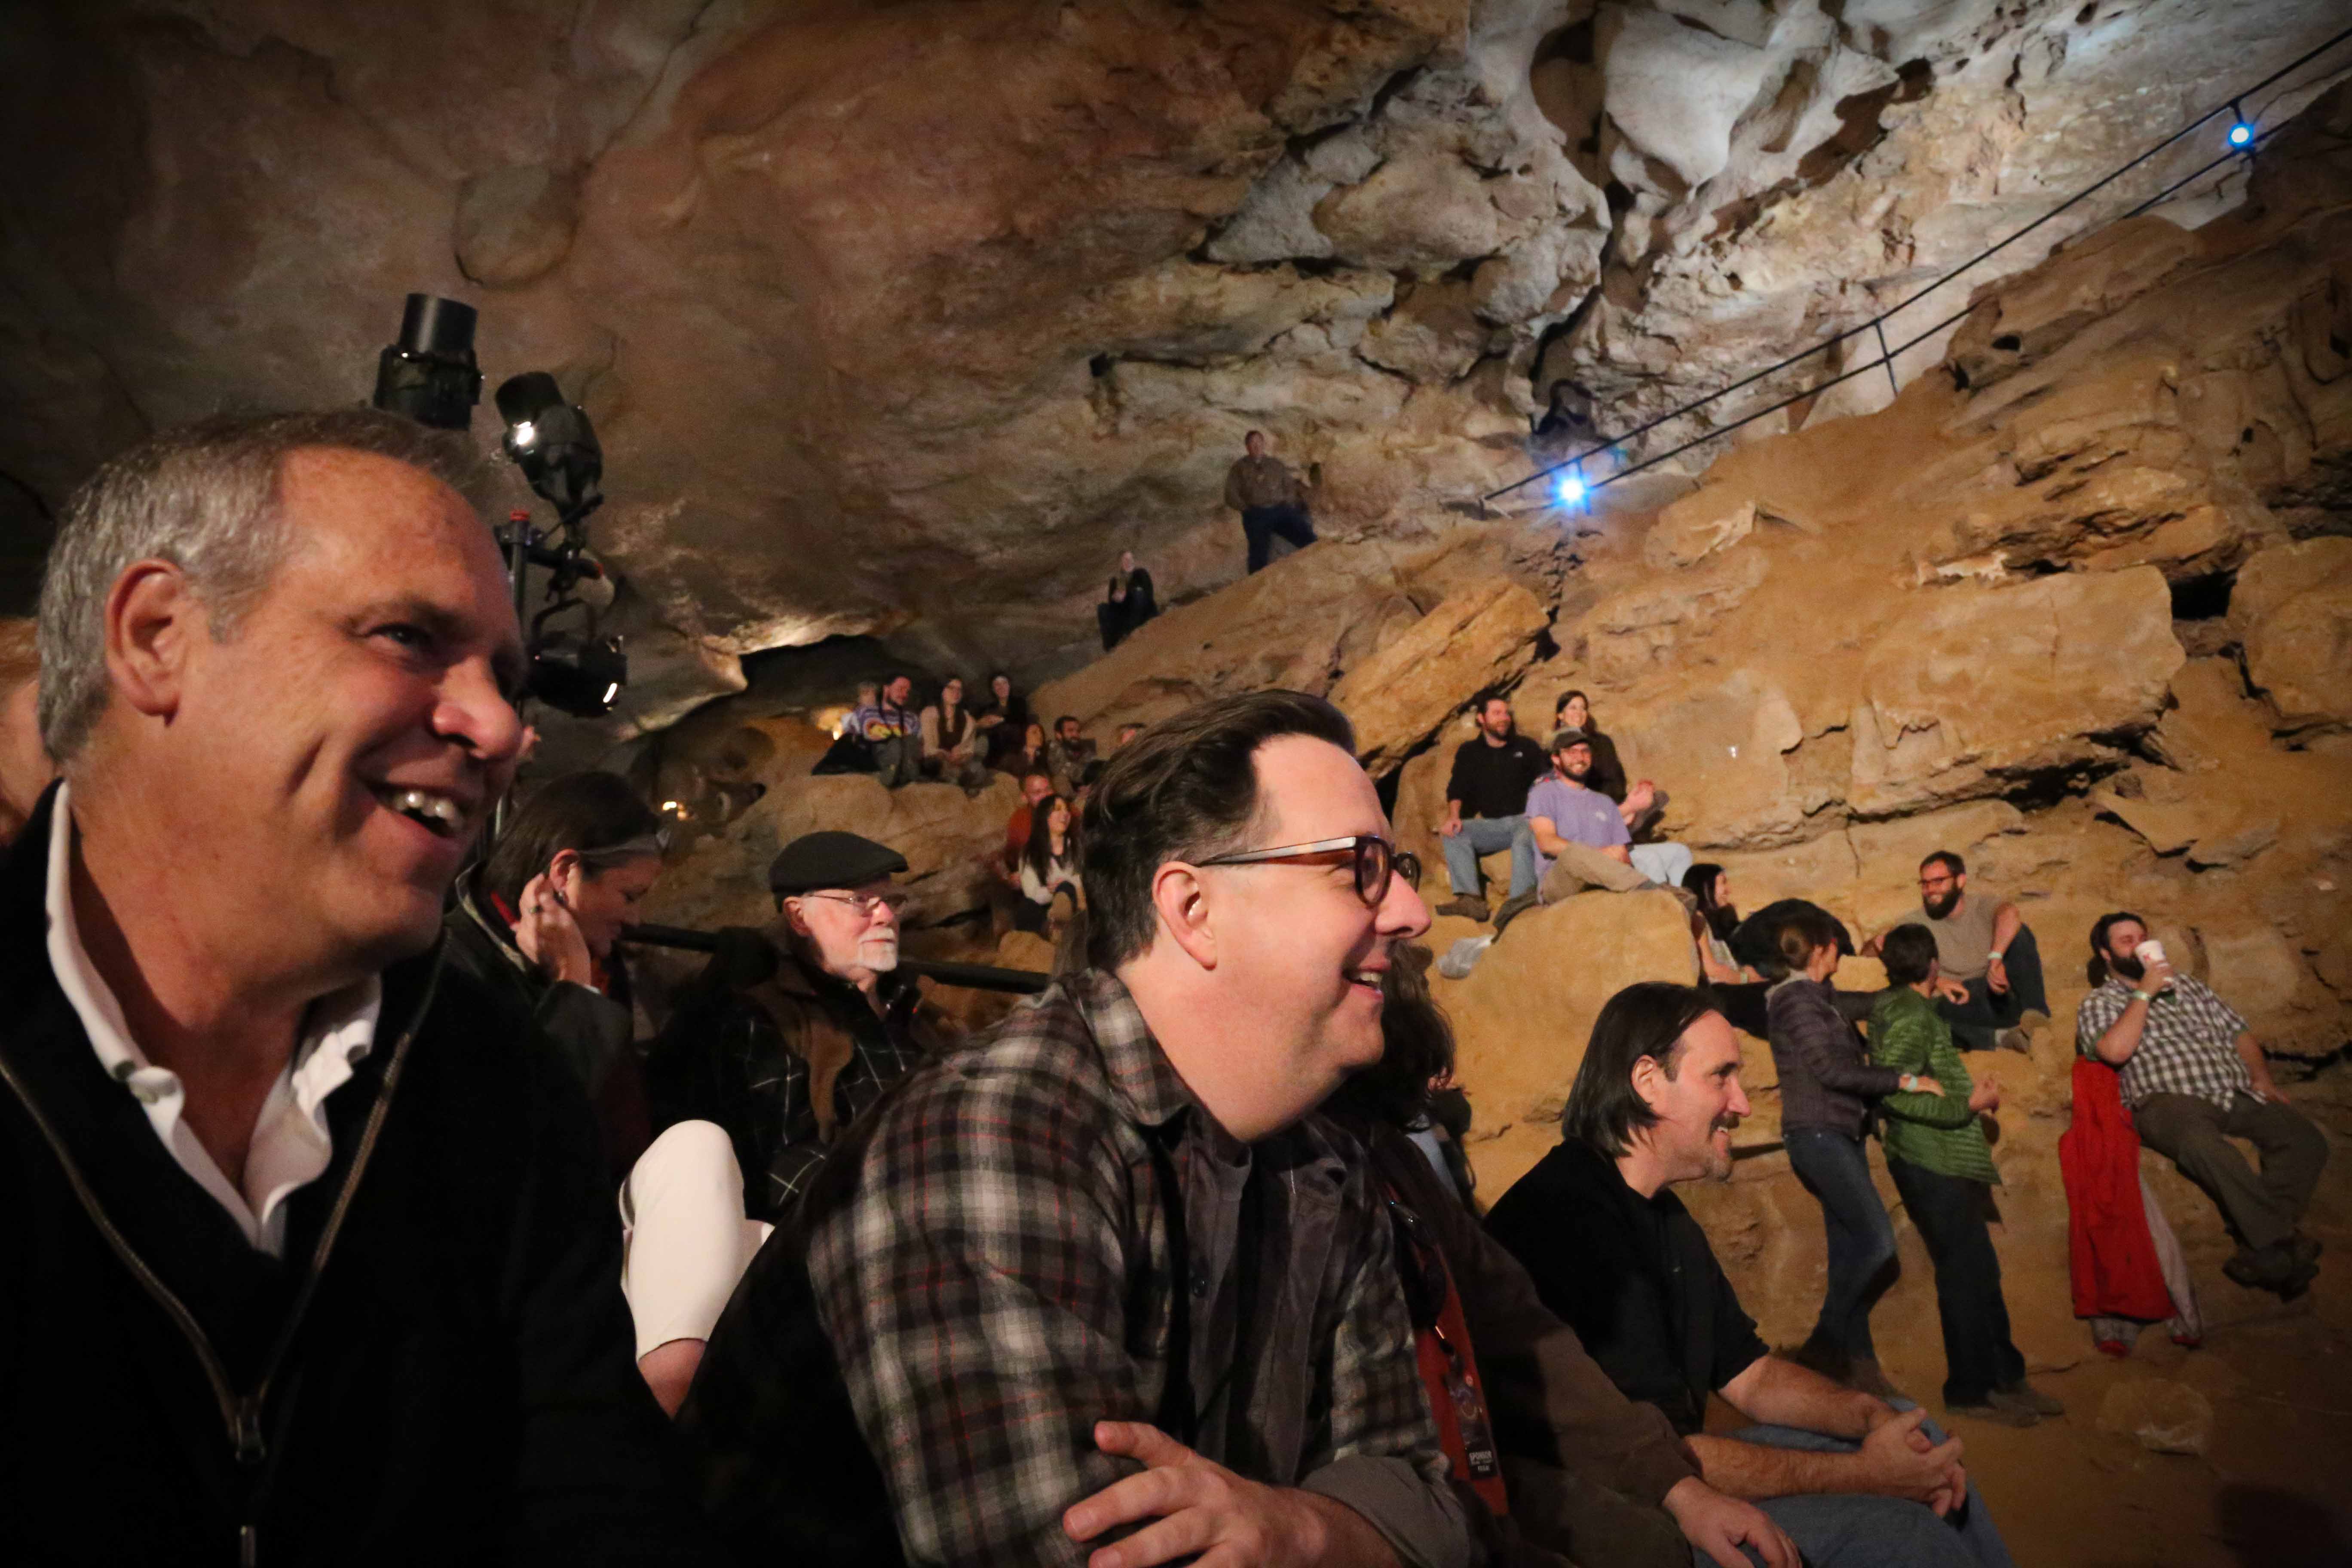 Bluegrass Underground, deep in the belly of a Tennessee cave, is one of the most surreal concerts you'll ever experience.